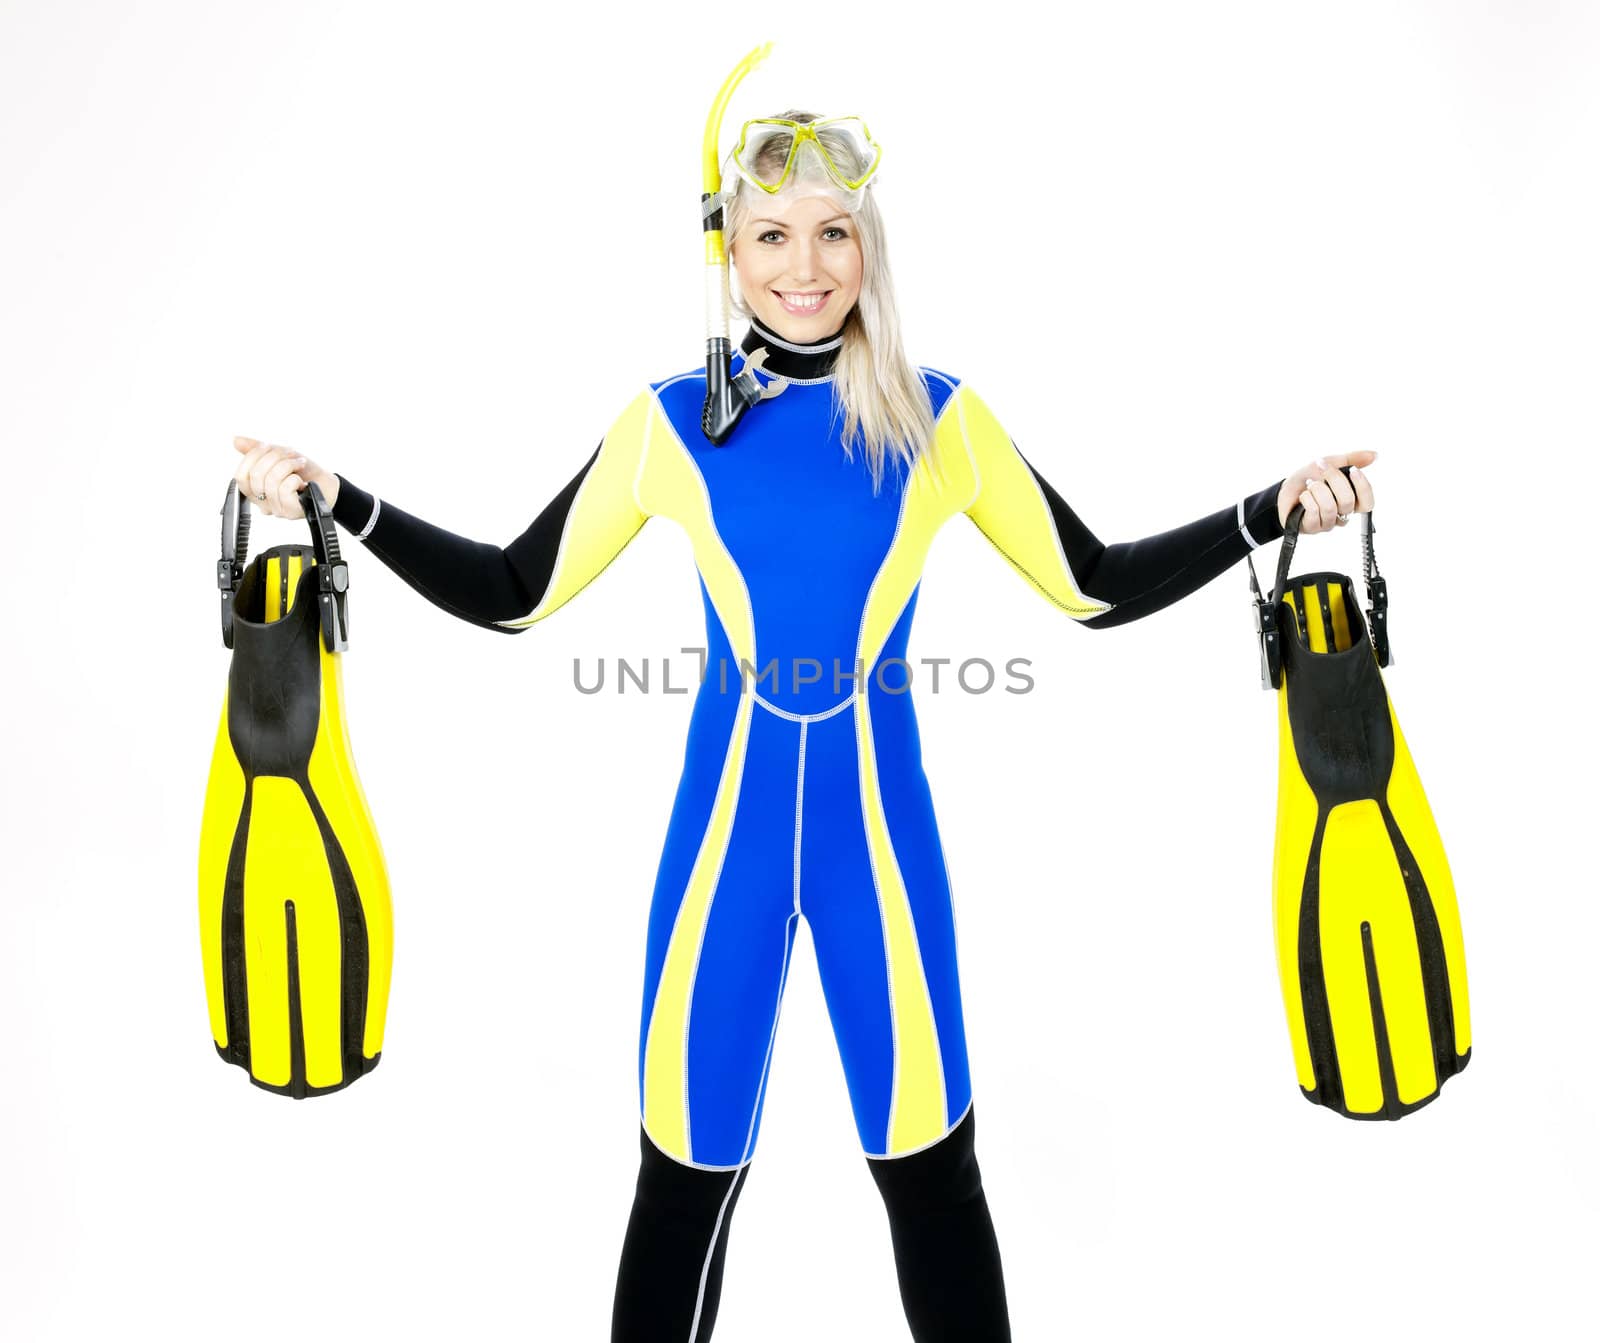 standing young woman wearing neoprene with snorkeling equipment by phbcz